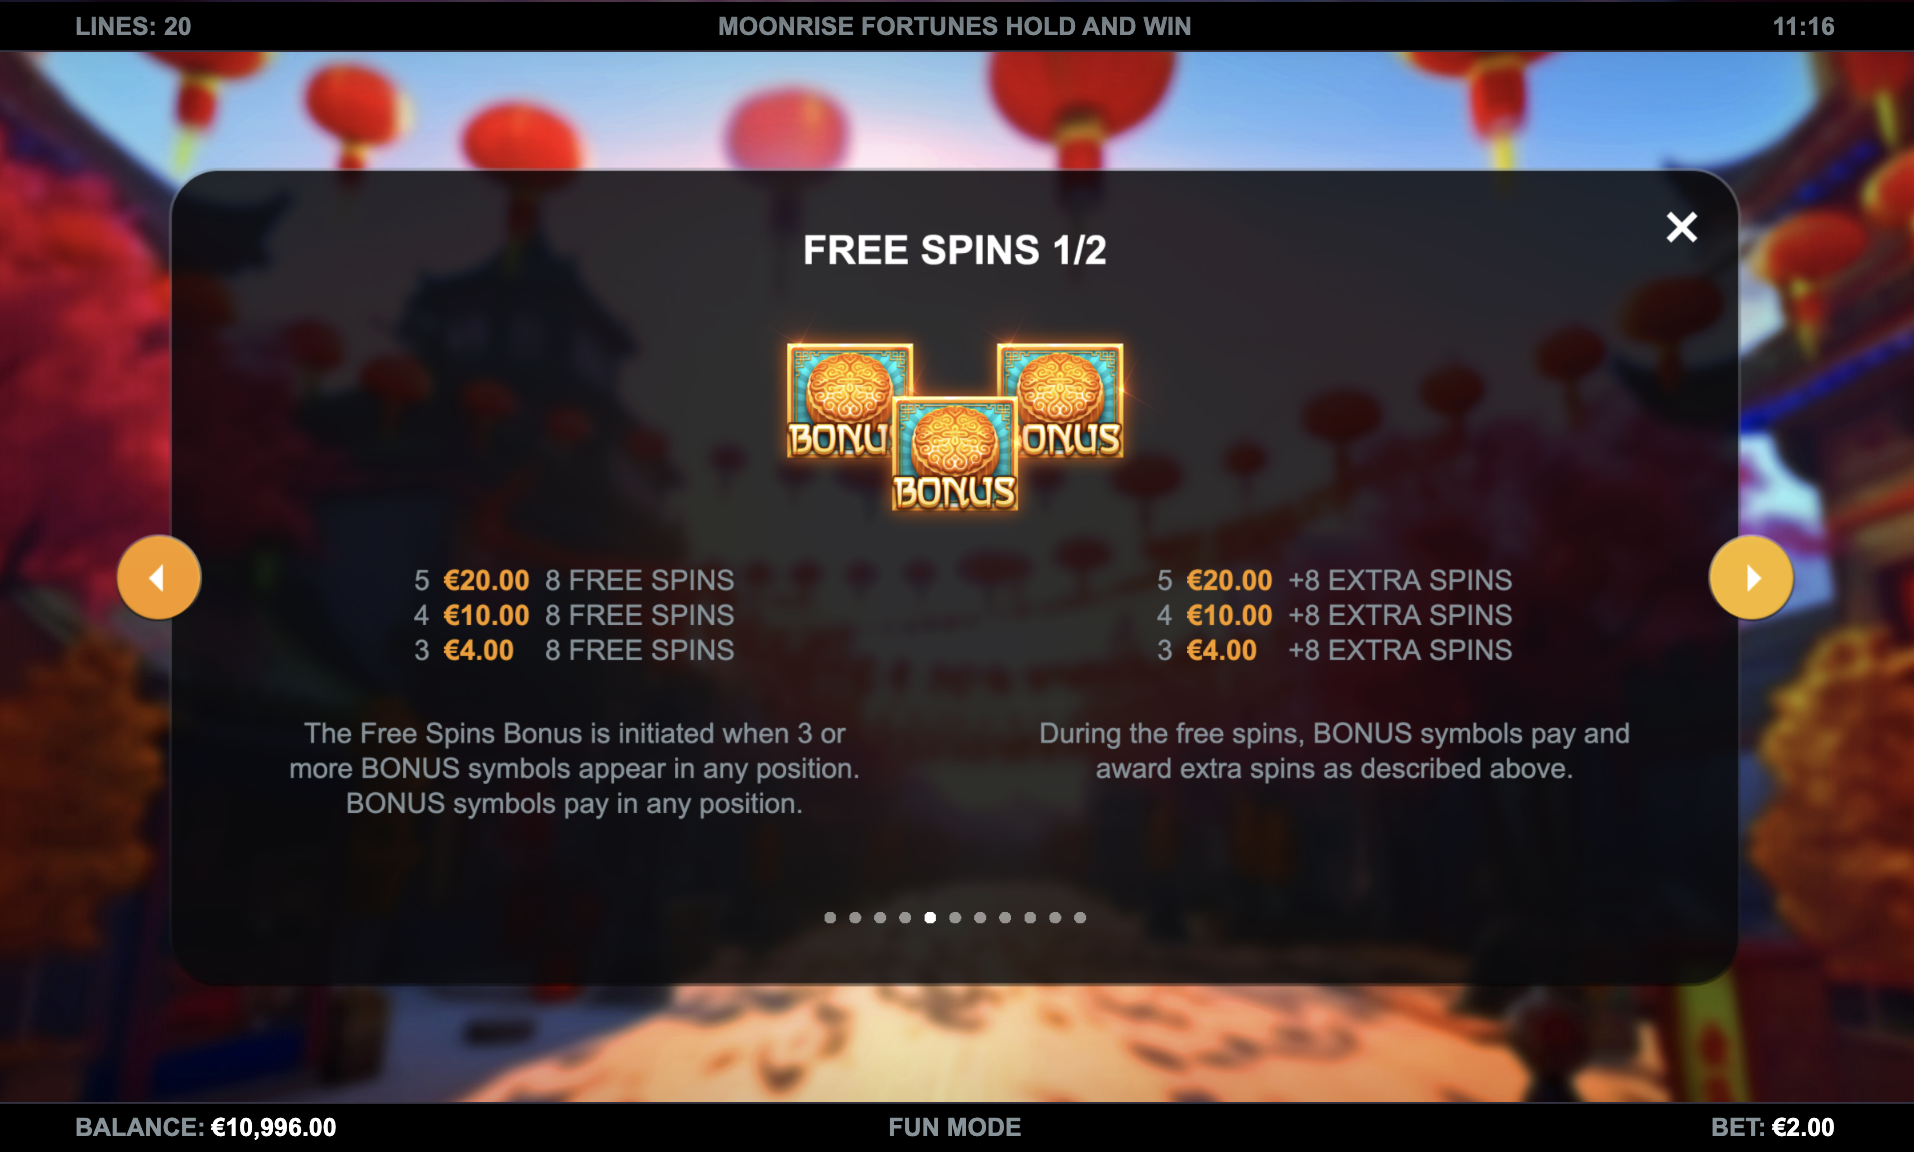 Moonrise Fortunes Hold & Win Slot